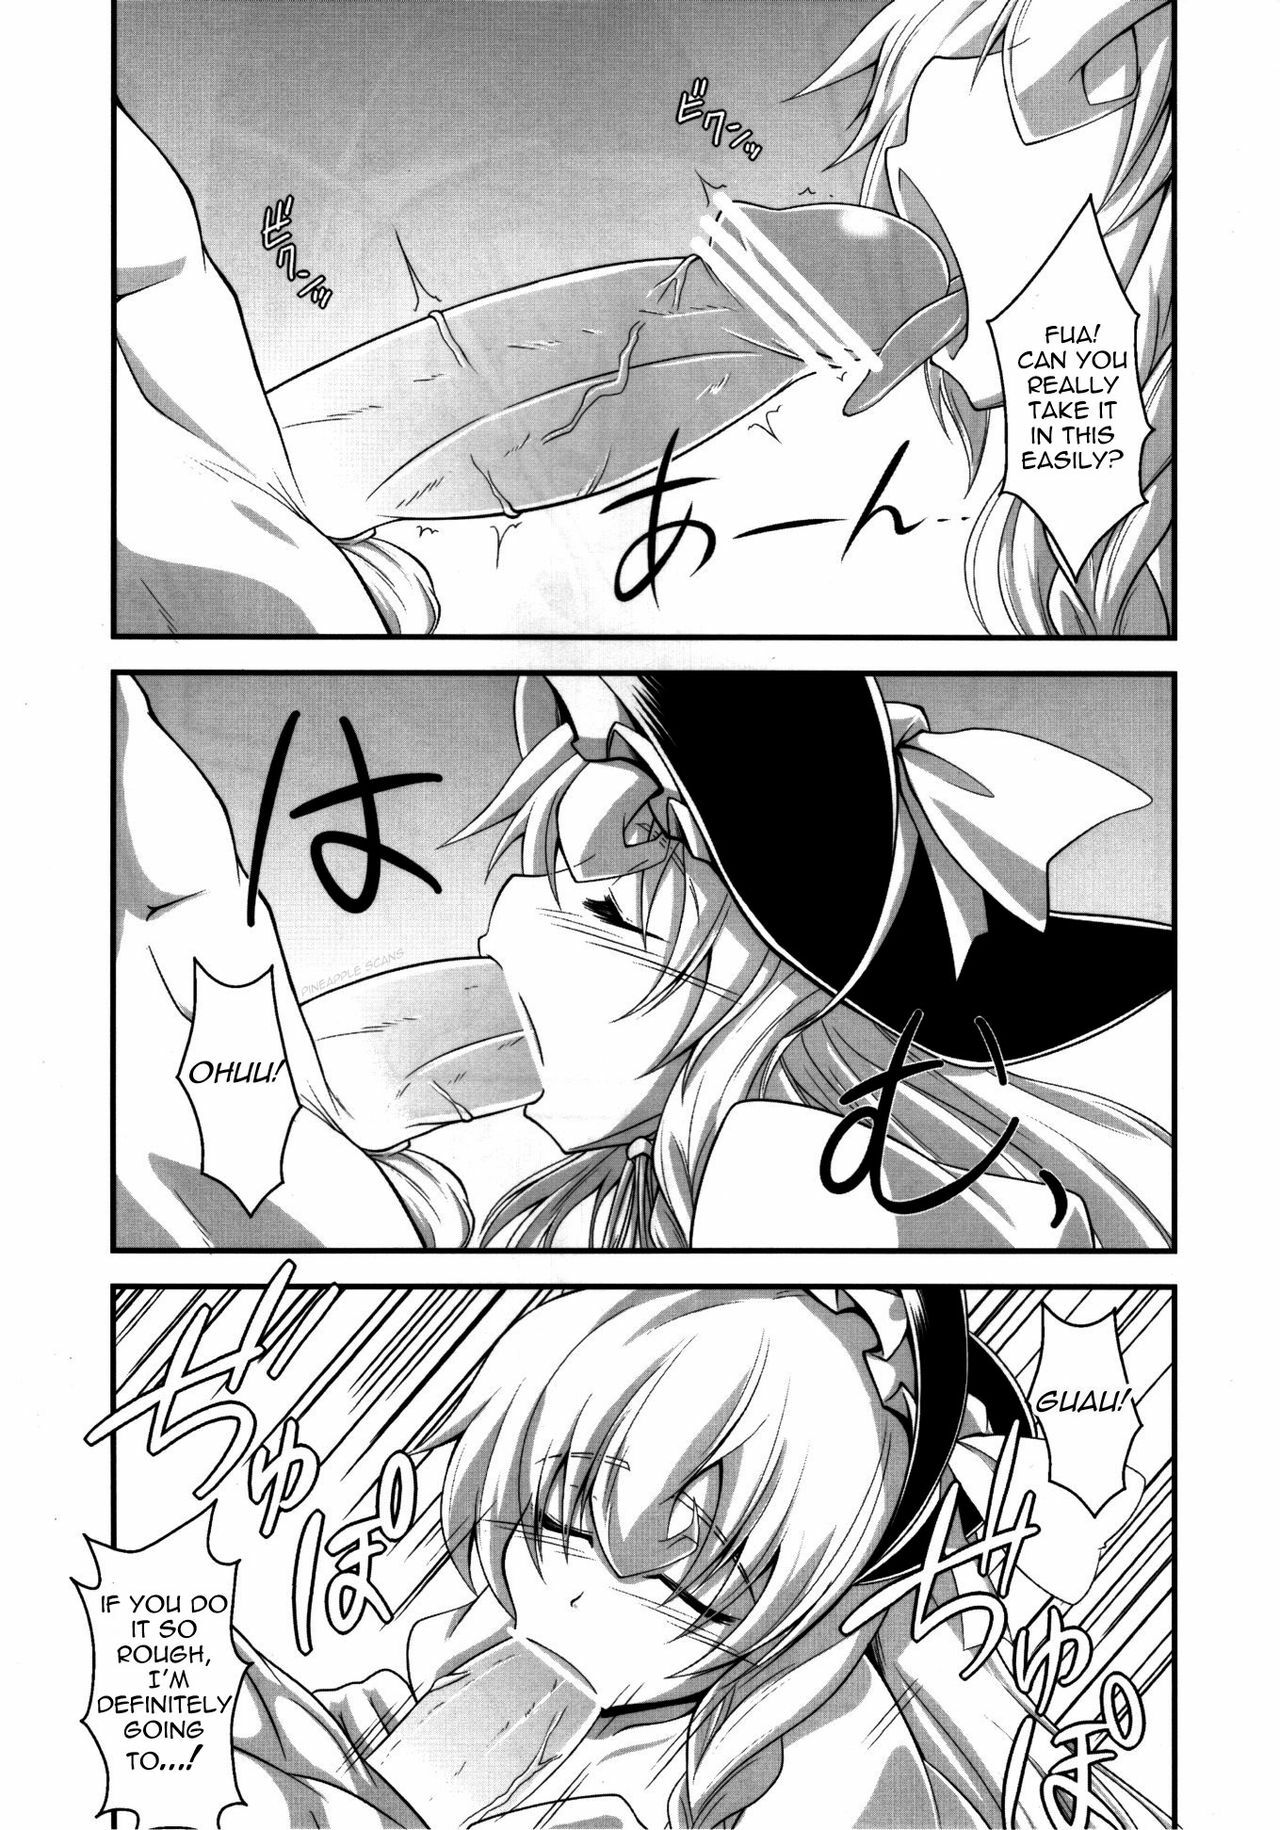 (Kouroumu 6) [Forever and ever... (Eisen)] GLAMOROUS MARISA (Touhou Project) [English] =Pineapples r Us= page 5 full